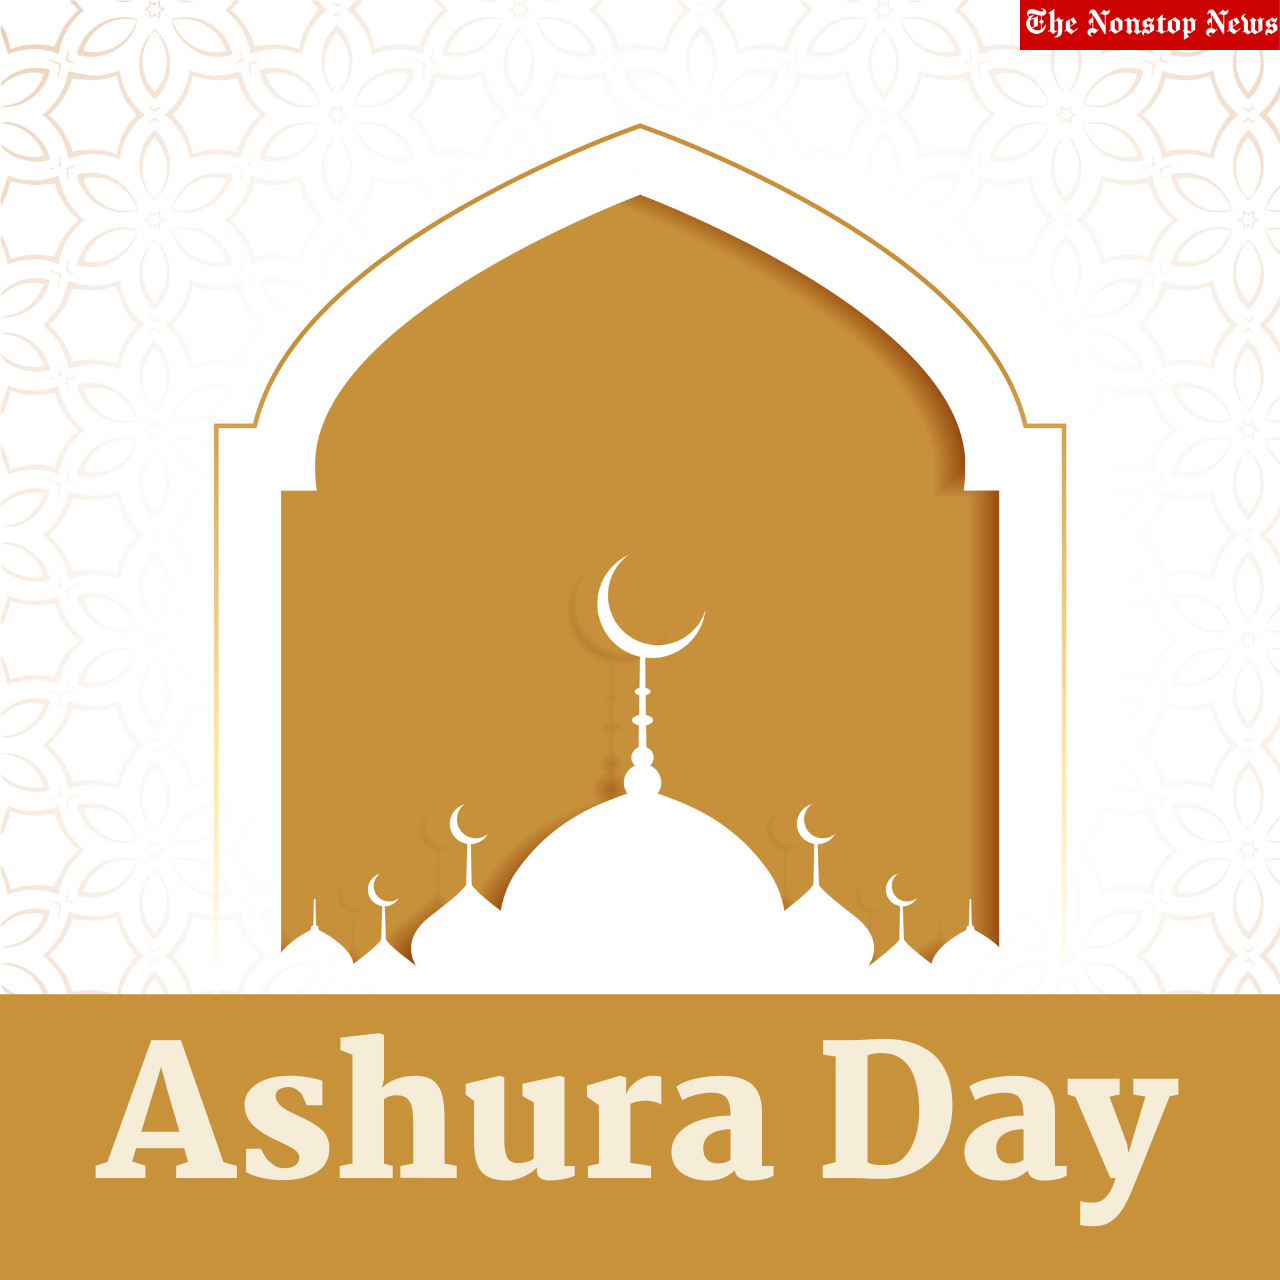 Ashura 2021 Wishes, Greetings, Messages, and Quotes from the Quran to celebrate the 10th day of Muharram